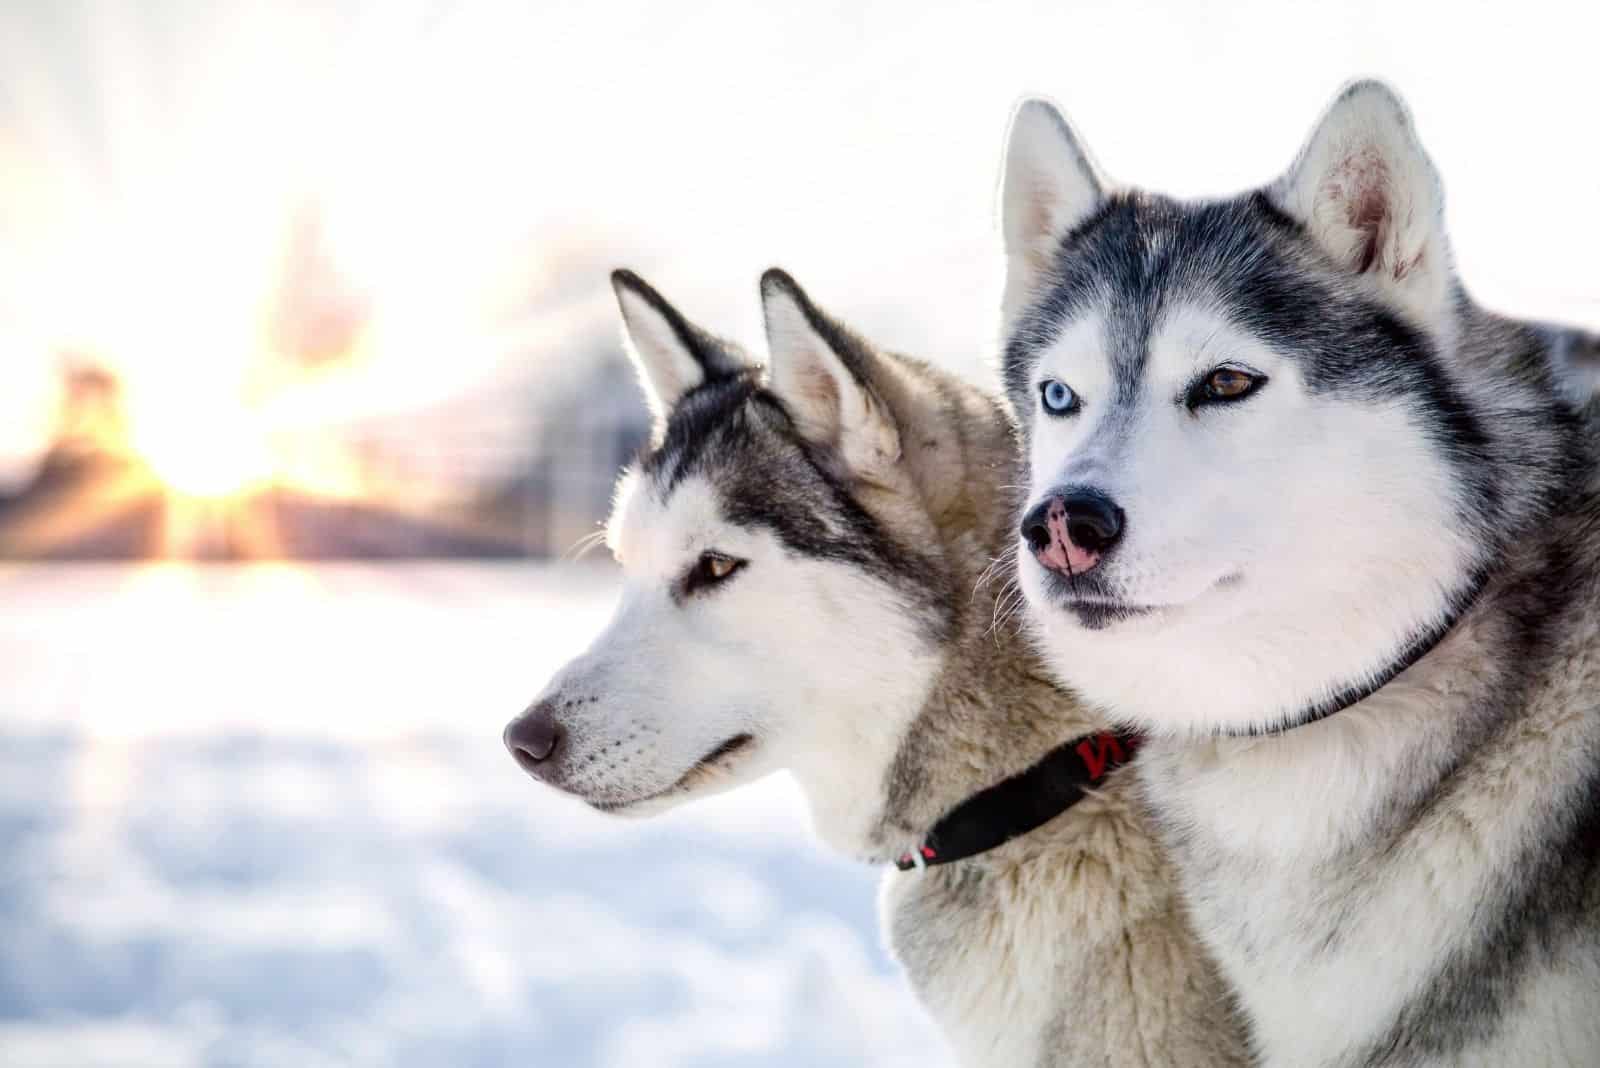 two siberian huskies looks around in the snowy background